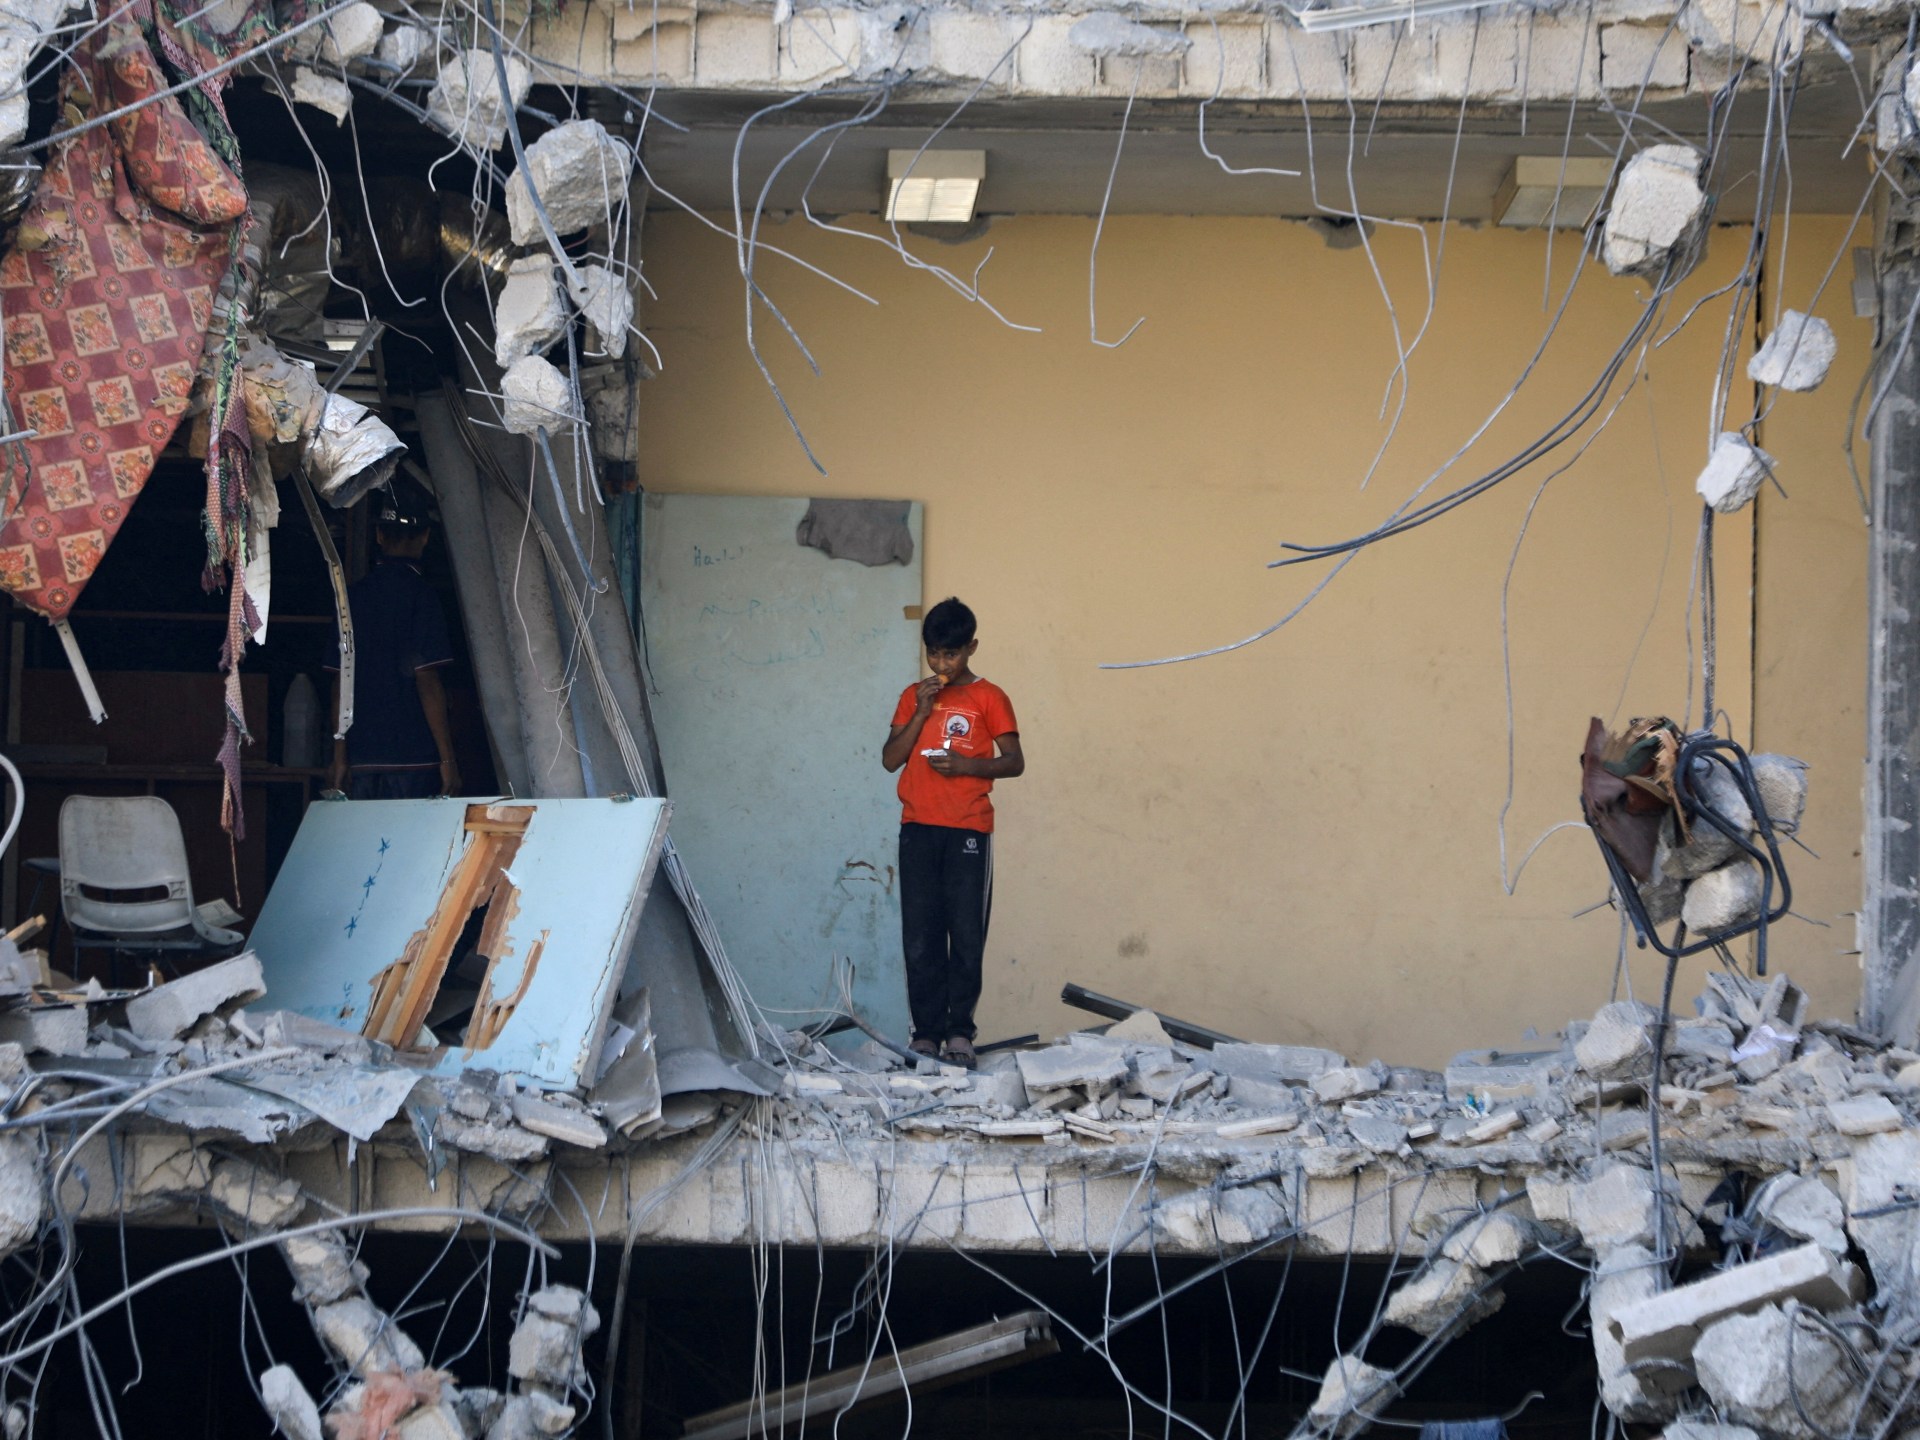 Clearing Gaza rubble could take 15 years, UN agency says | Israel-Palestine conflict News